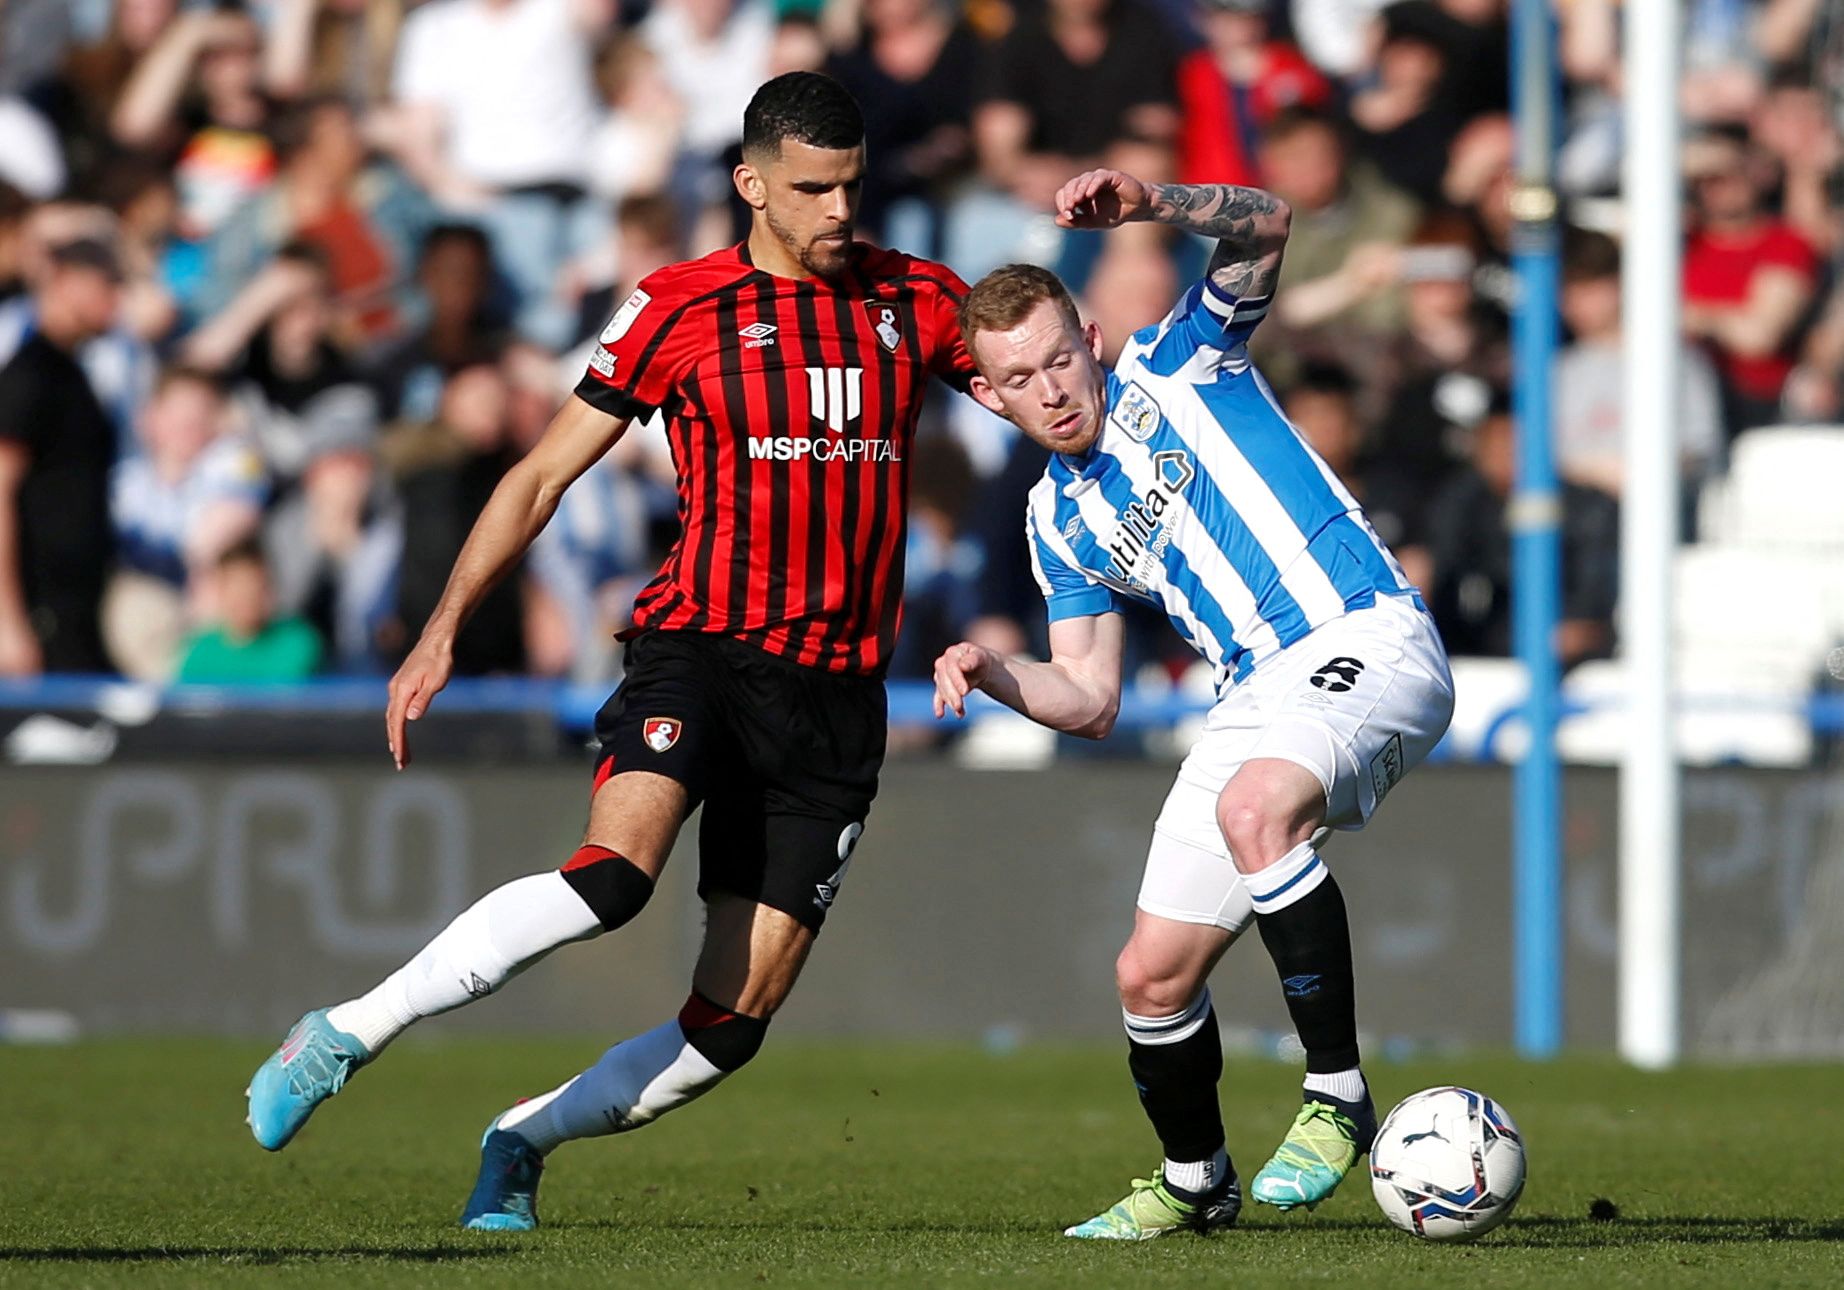 Soccer Football - Championship - Huddersfield Town v AFC Bournemouth - John Smith's Stadium, Huddersfield, Britain - March 19, 2022 AFC Bournemouth's Dominic Solanke in action with Huddersfield Town's Lewis O'Brien  Action Images/Ed Sykes  EDITORIAL USE ONLY. No use with unauthorized audio, video, data, fixture lists, club/league logos or 